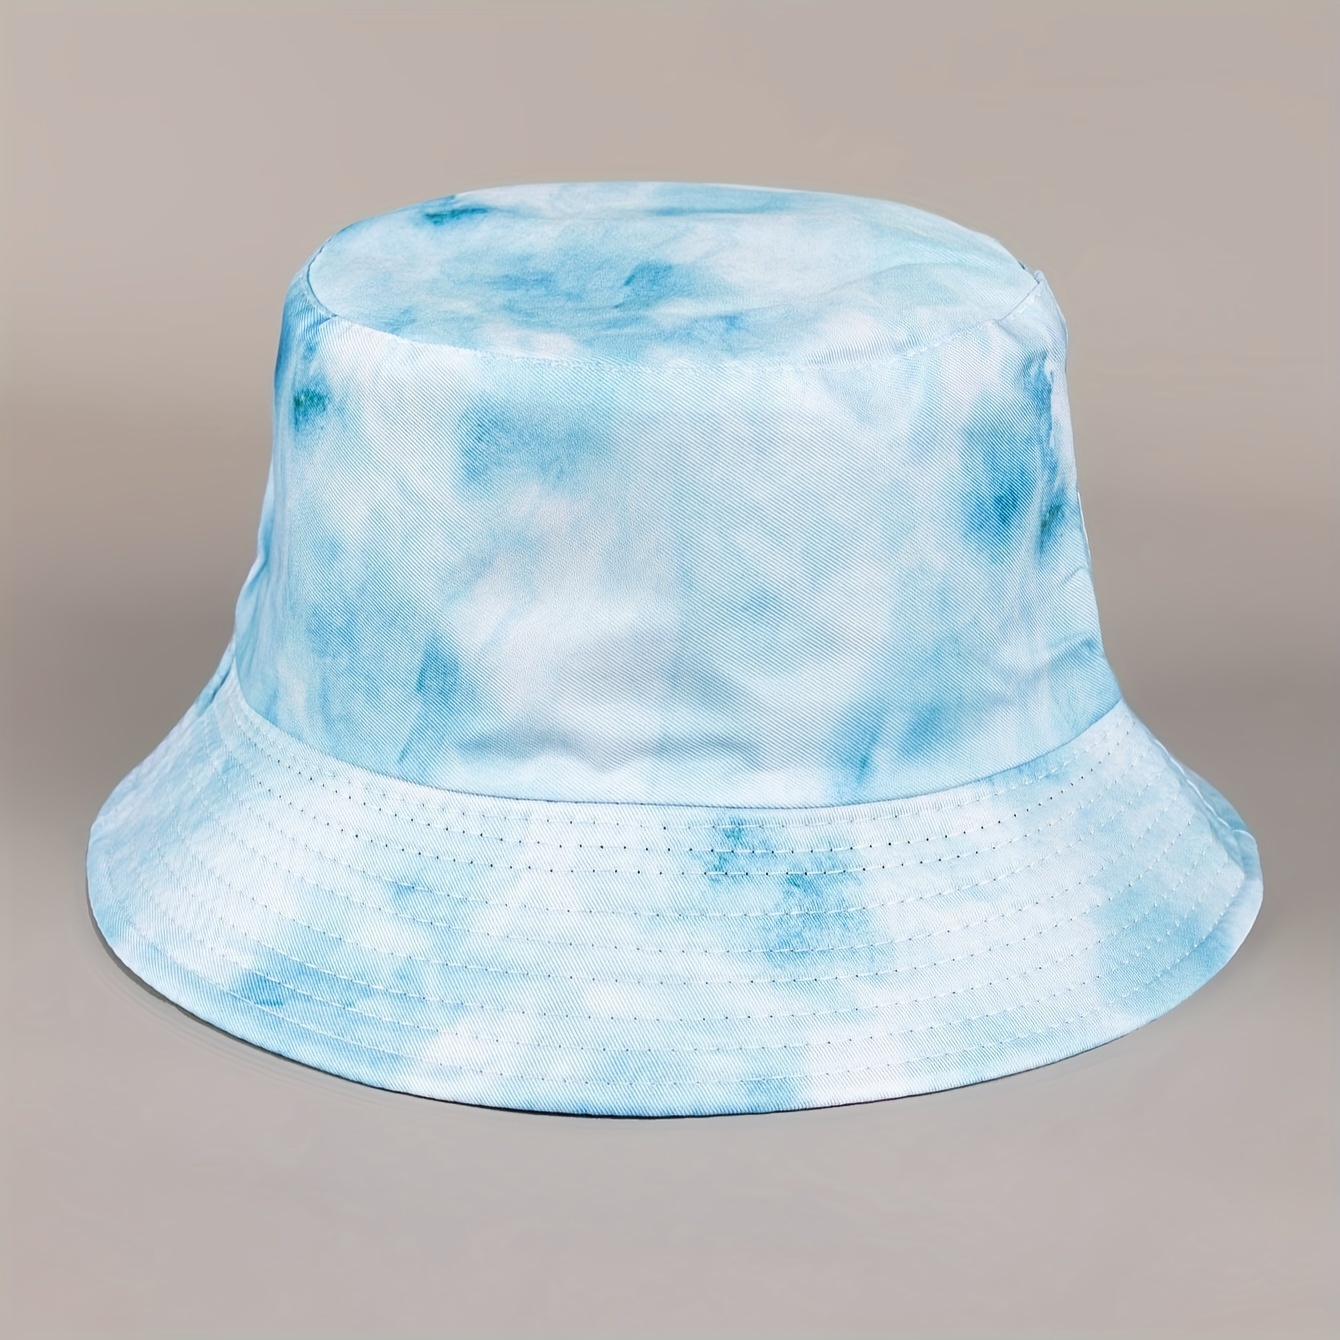 

Reversible Light Blue Tie Dye Bucket Hat, Trendy Sun Protective Fisherman Cap, Lightweight, Breathable Cotton, For Women And Daily Use